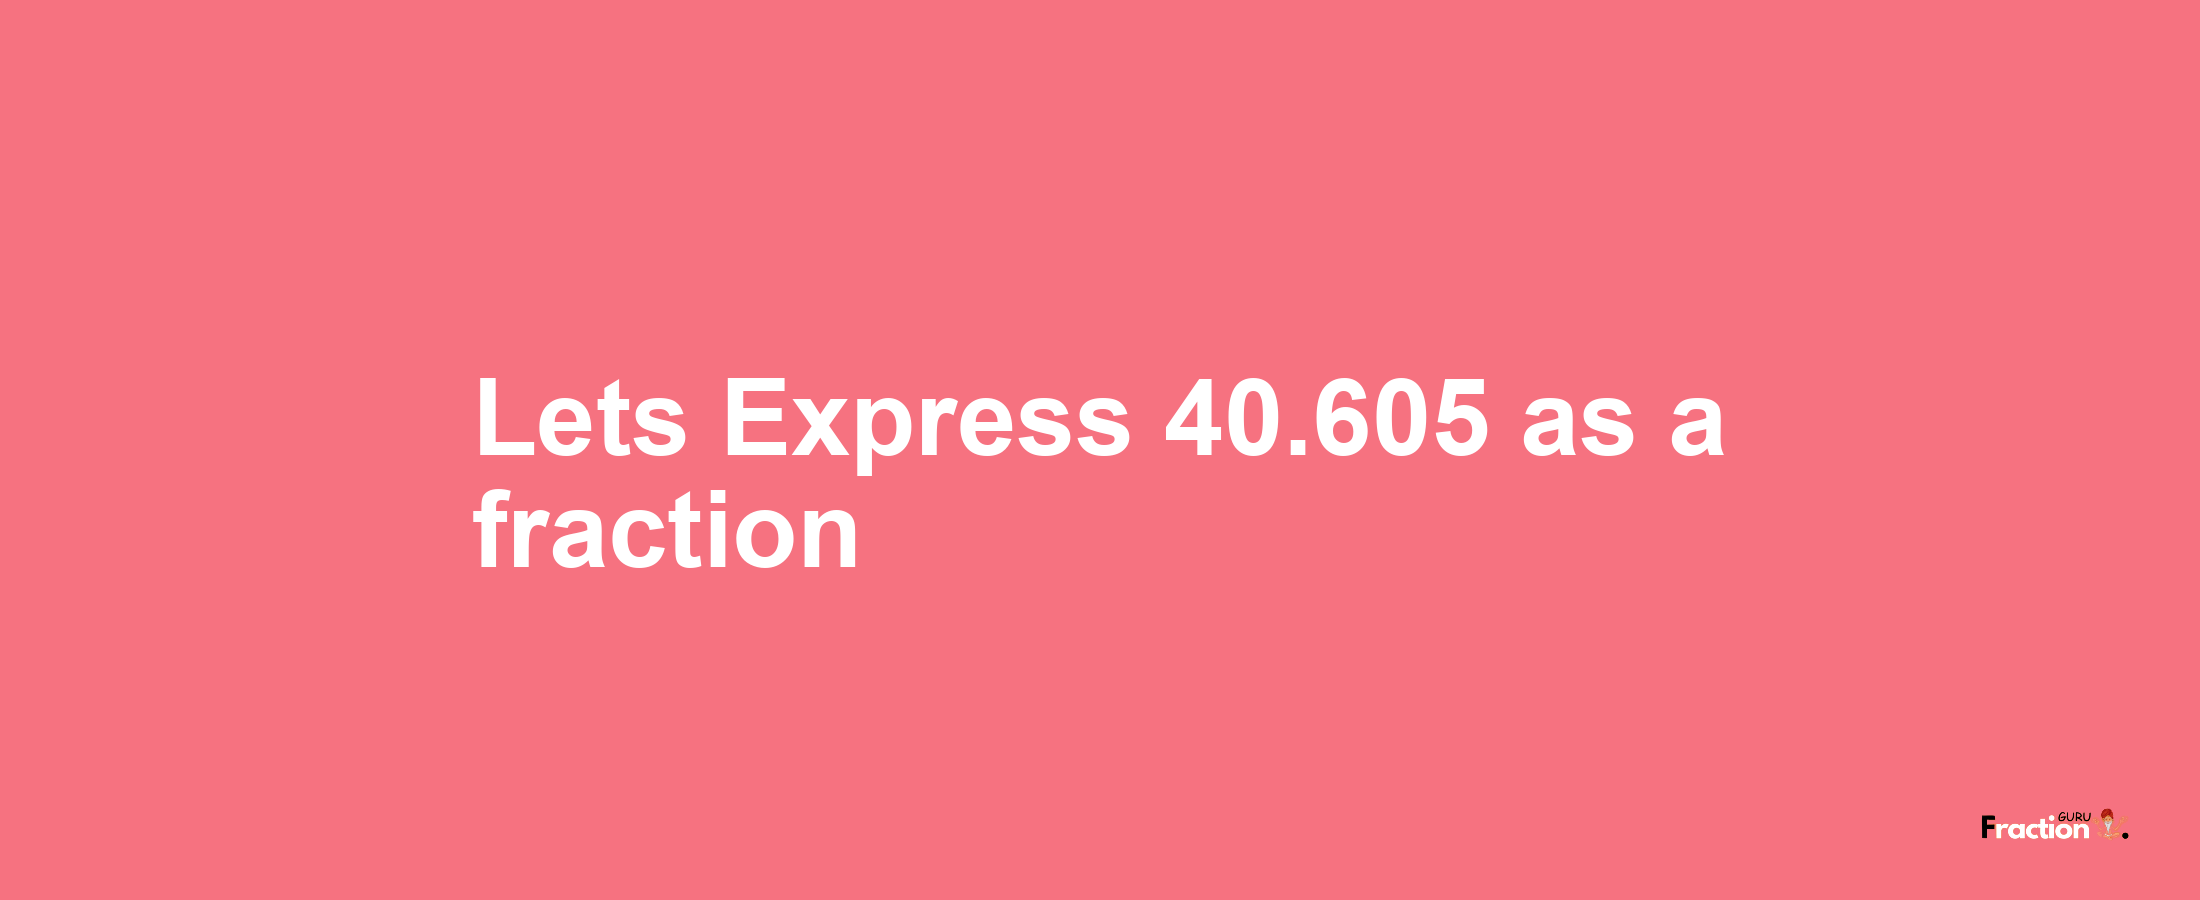 Lets Express 40.605 as afraction